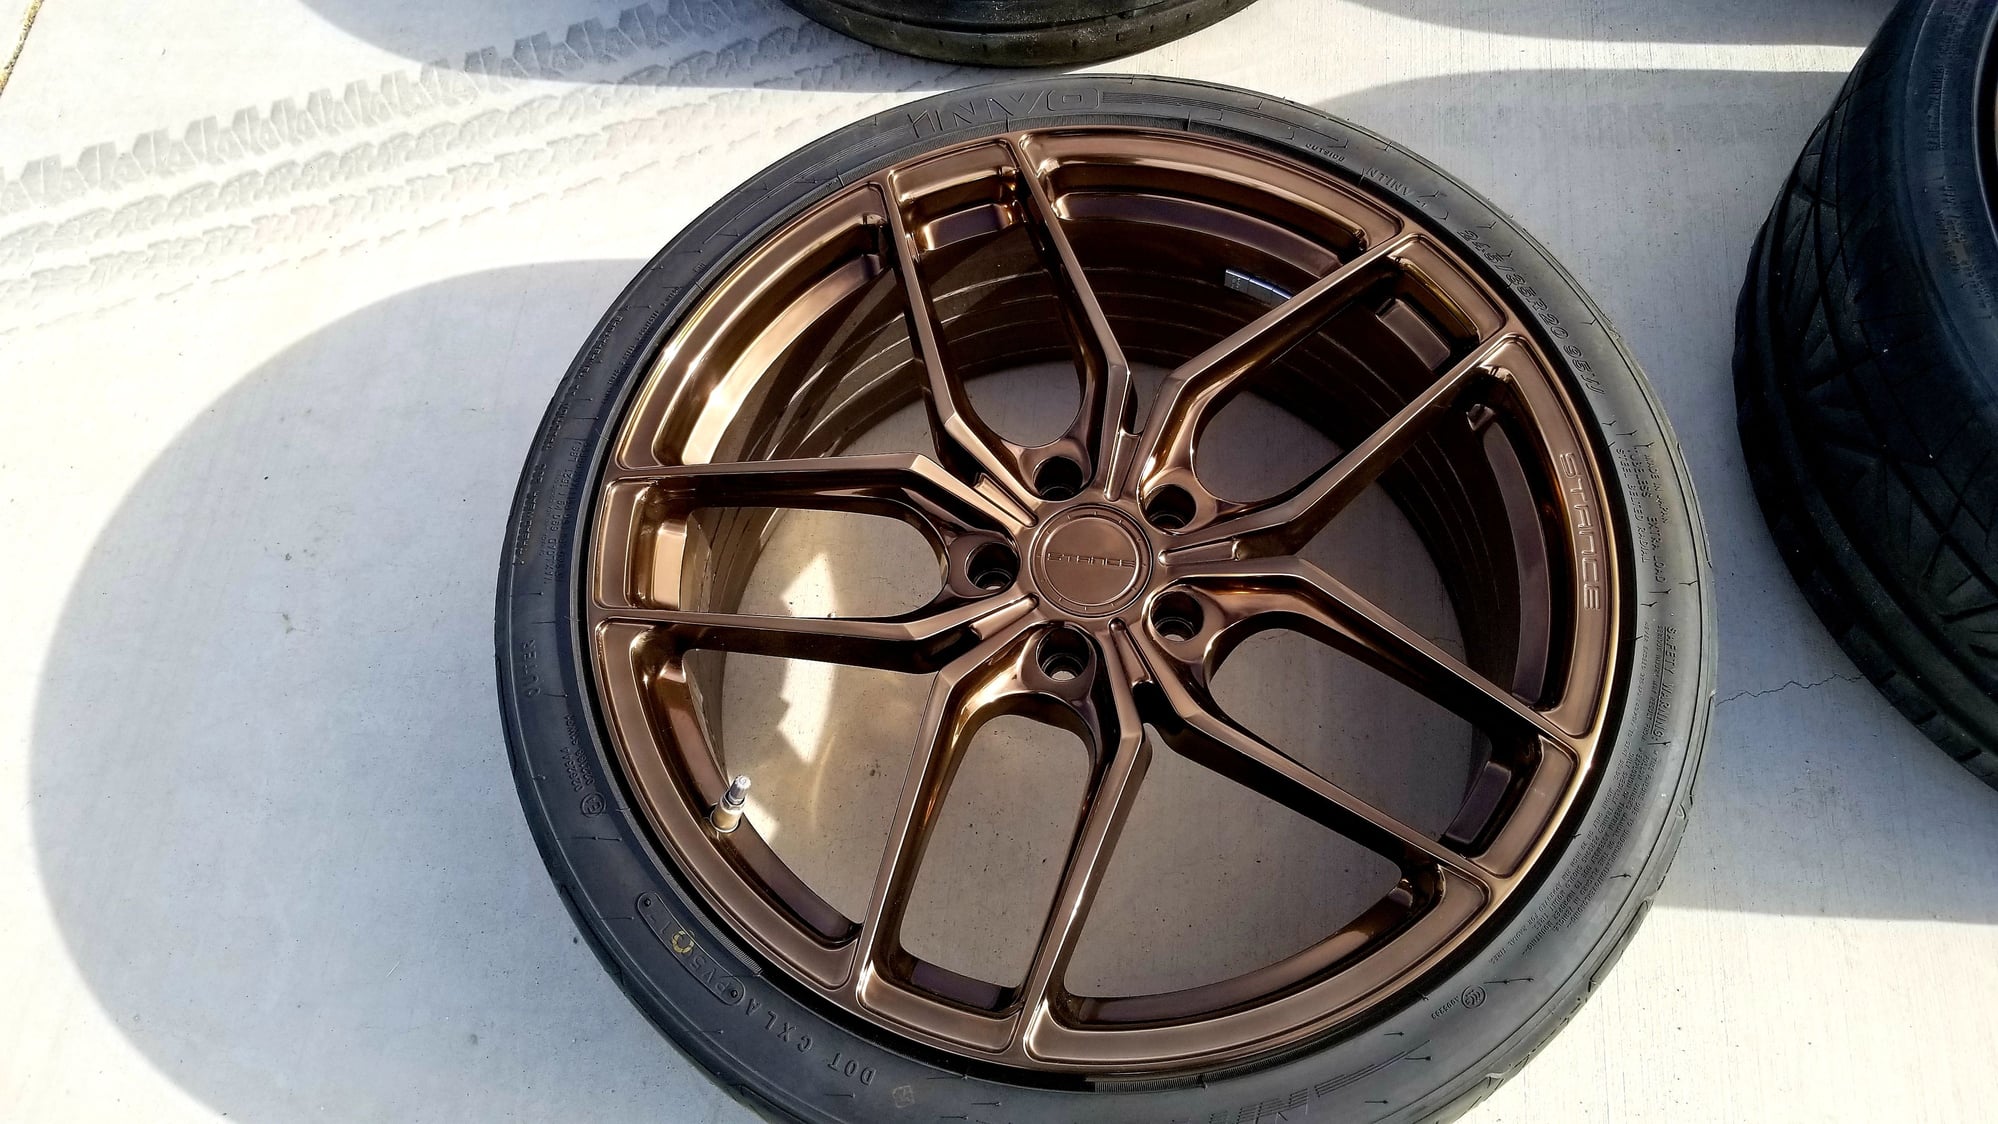 Wheels and Tires/Axles - FS: "TAILOR MADE" STANCE WHEELS SF03 5x114.3/20x9/20x10.5 with new tires - Used - All Years Acura TLX - 29 Palms, CA 92277, United States